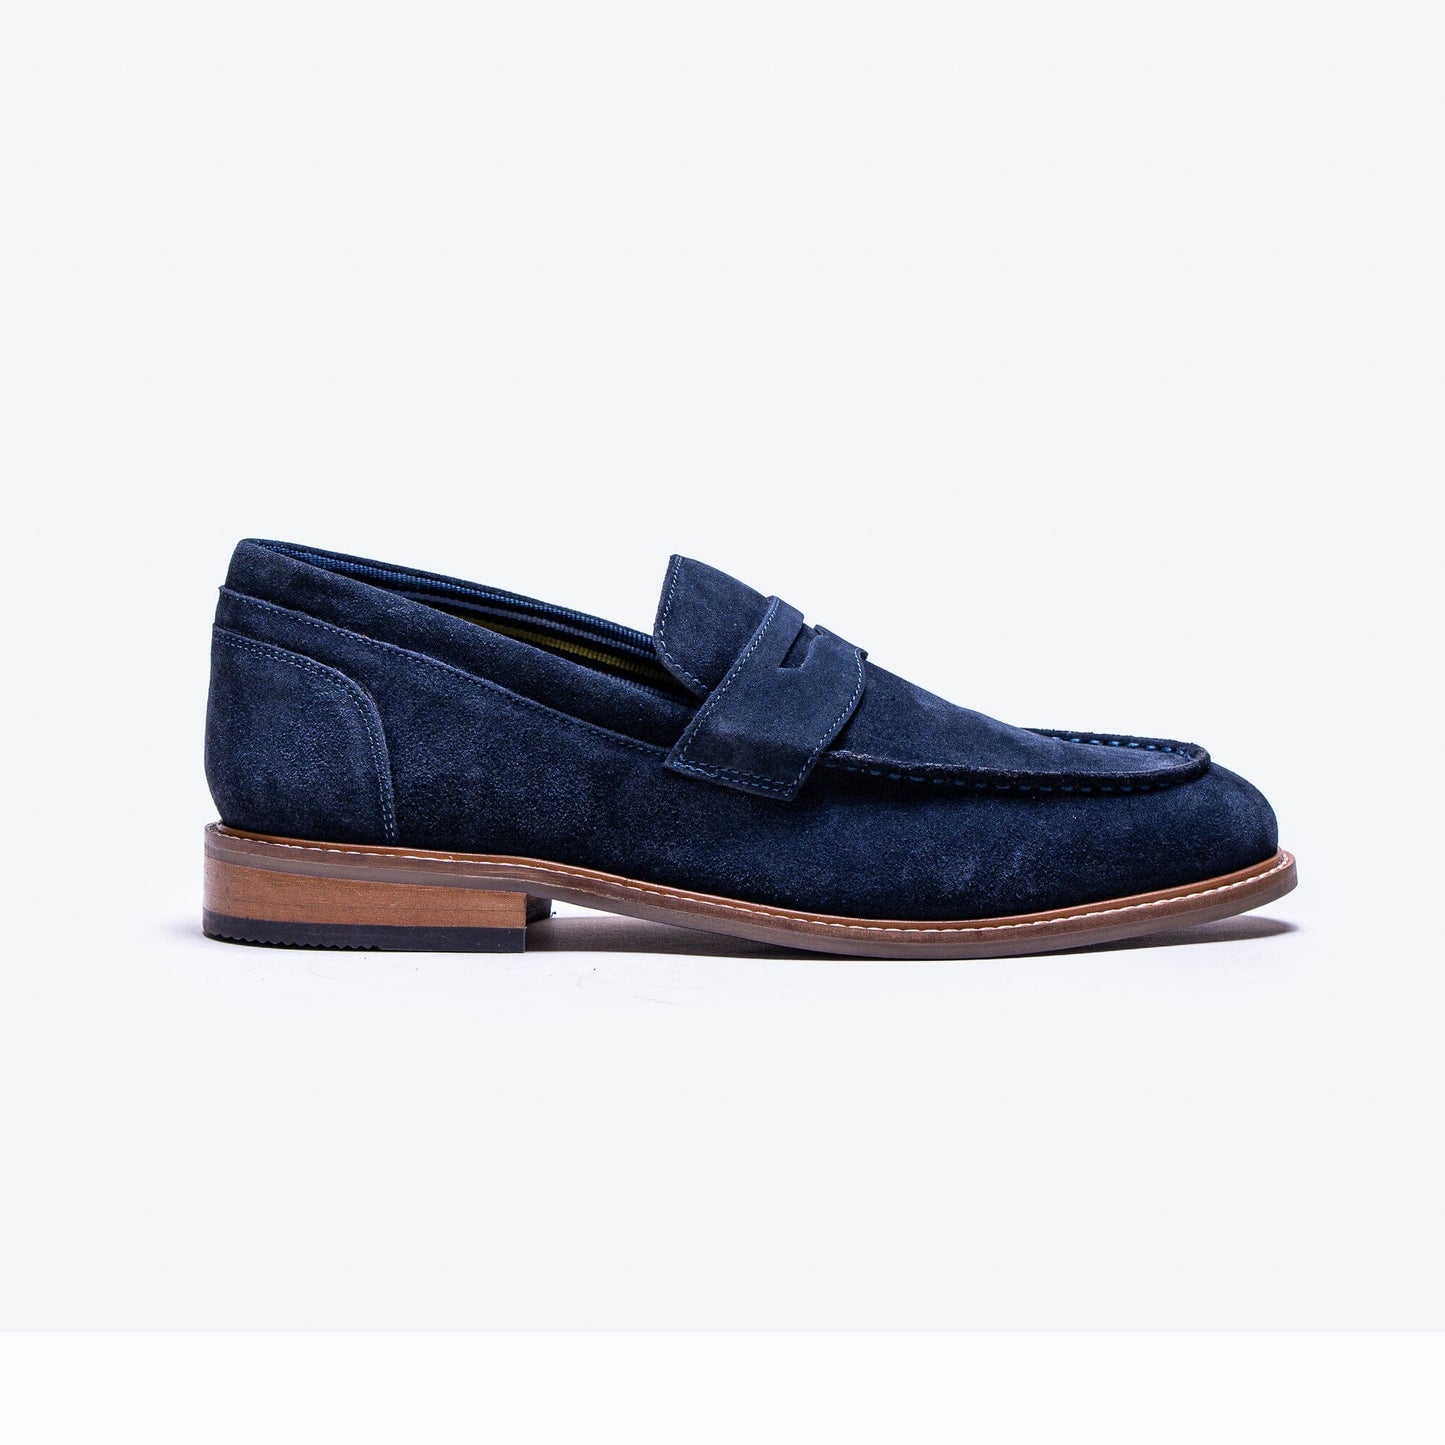 Jordan Navy Suede Loafers - Shoes - 7 - THREADPEPPER